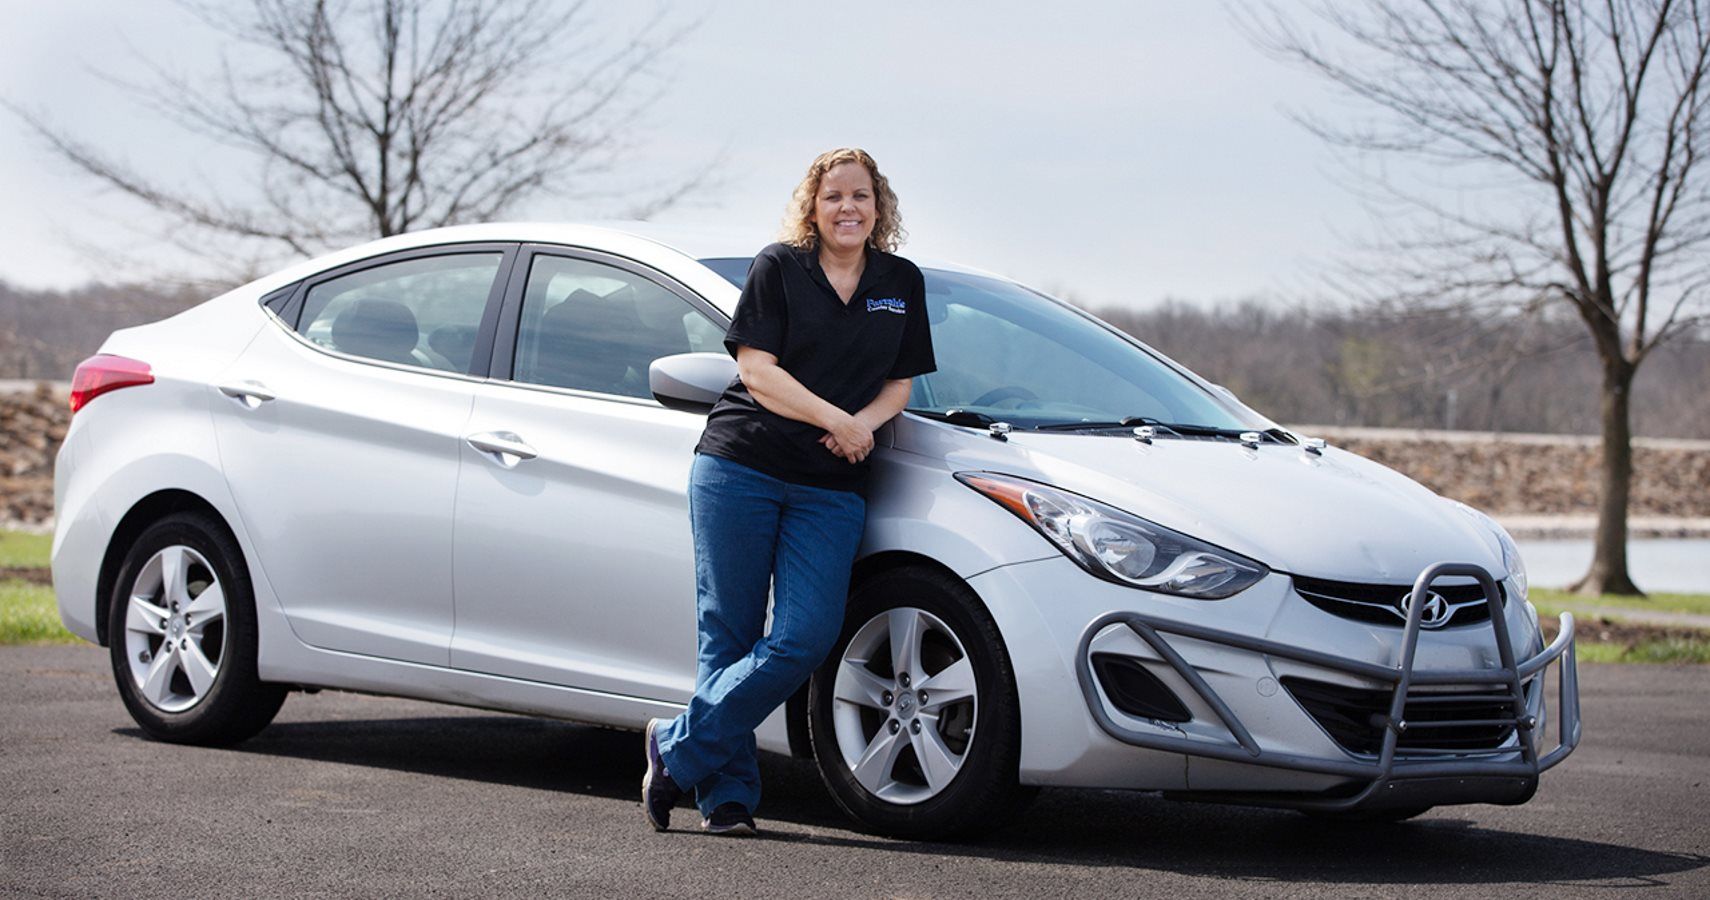 This Woman Drove A Hyundai Elantra 1 Million Miles In Just 5 Years